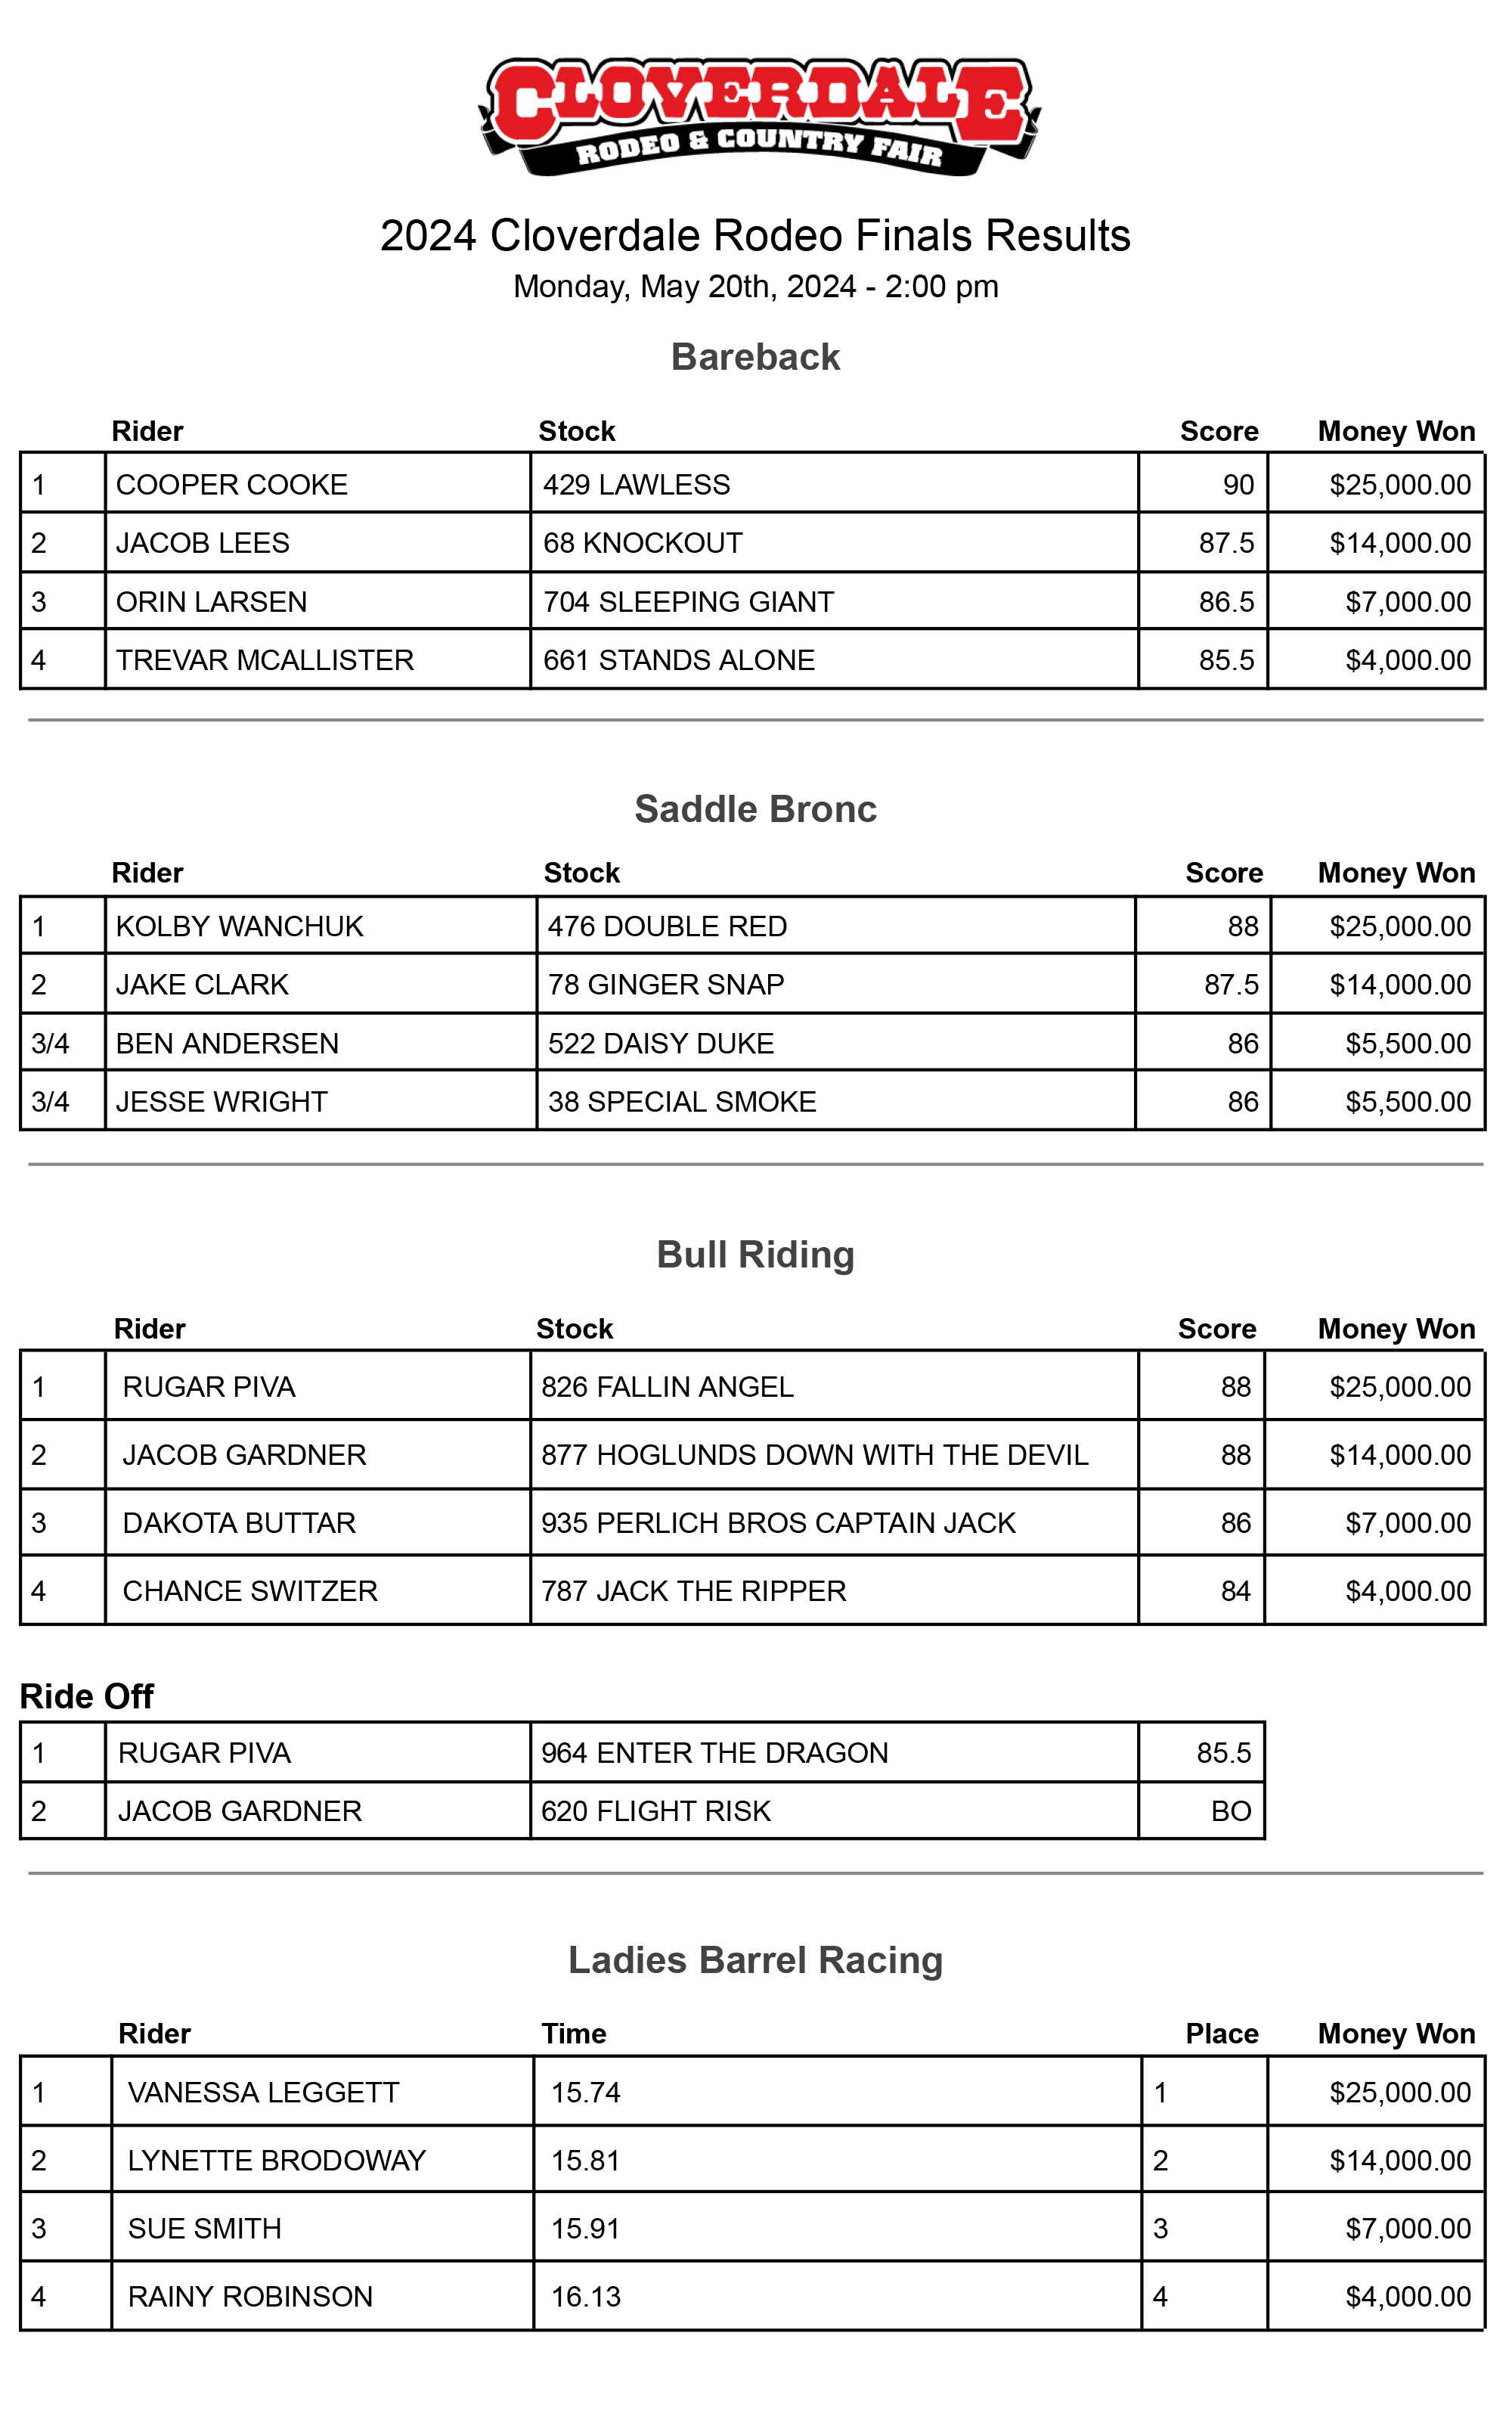 Cloverdale Rodeo - 2024 Rodeo Finals Results - 240520